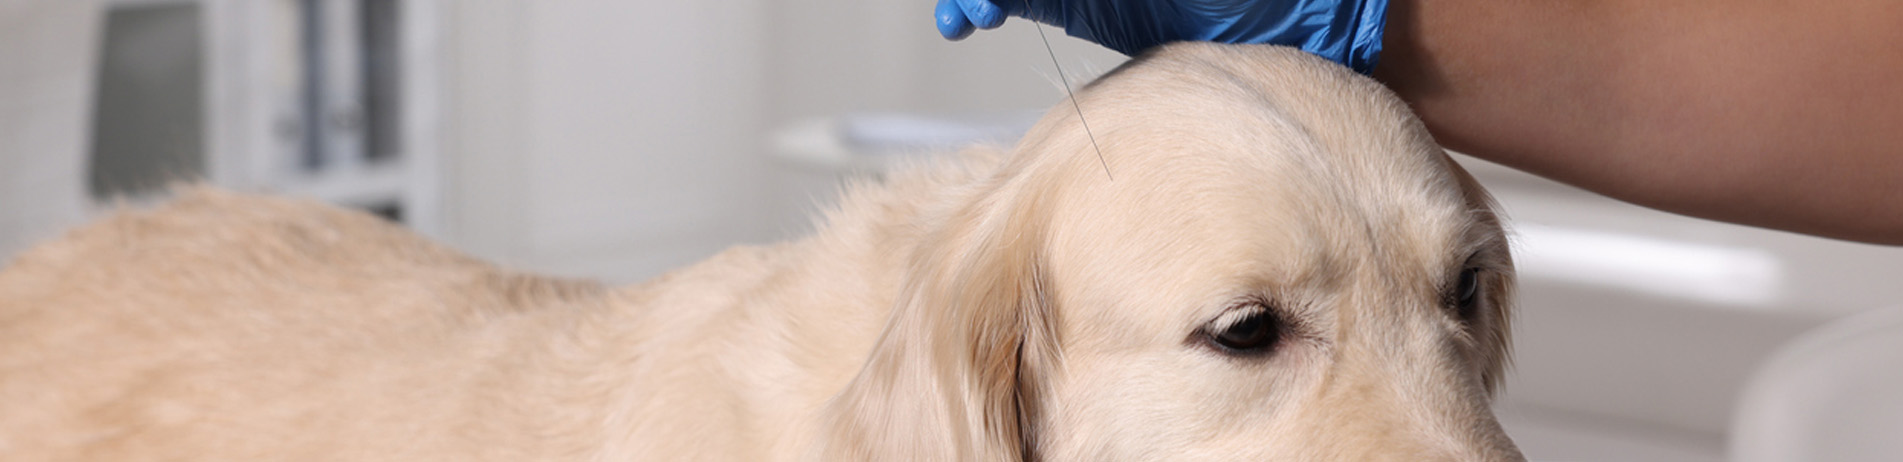 Pet Acupuncture | Animal Acupuncture | Boundary Vets